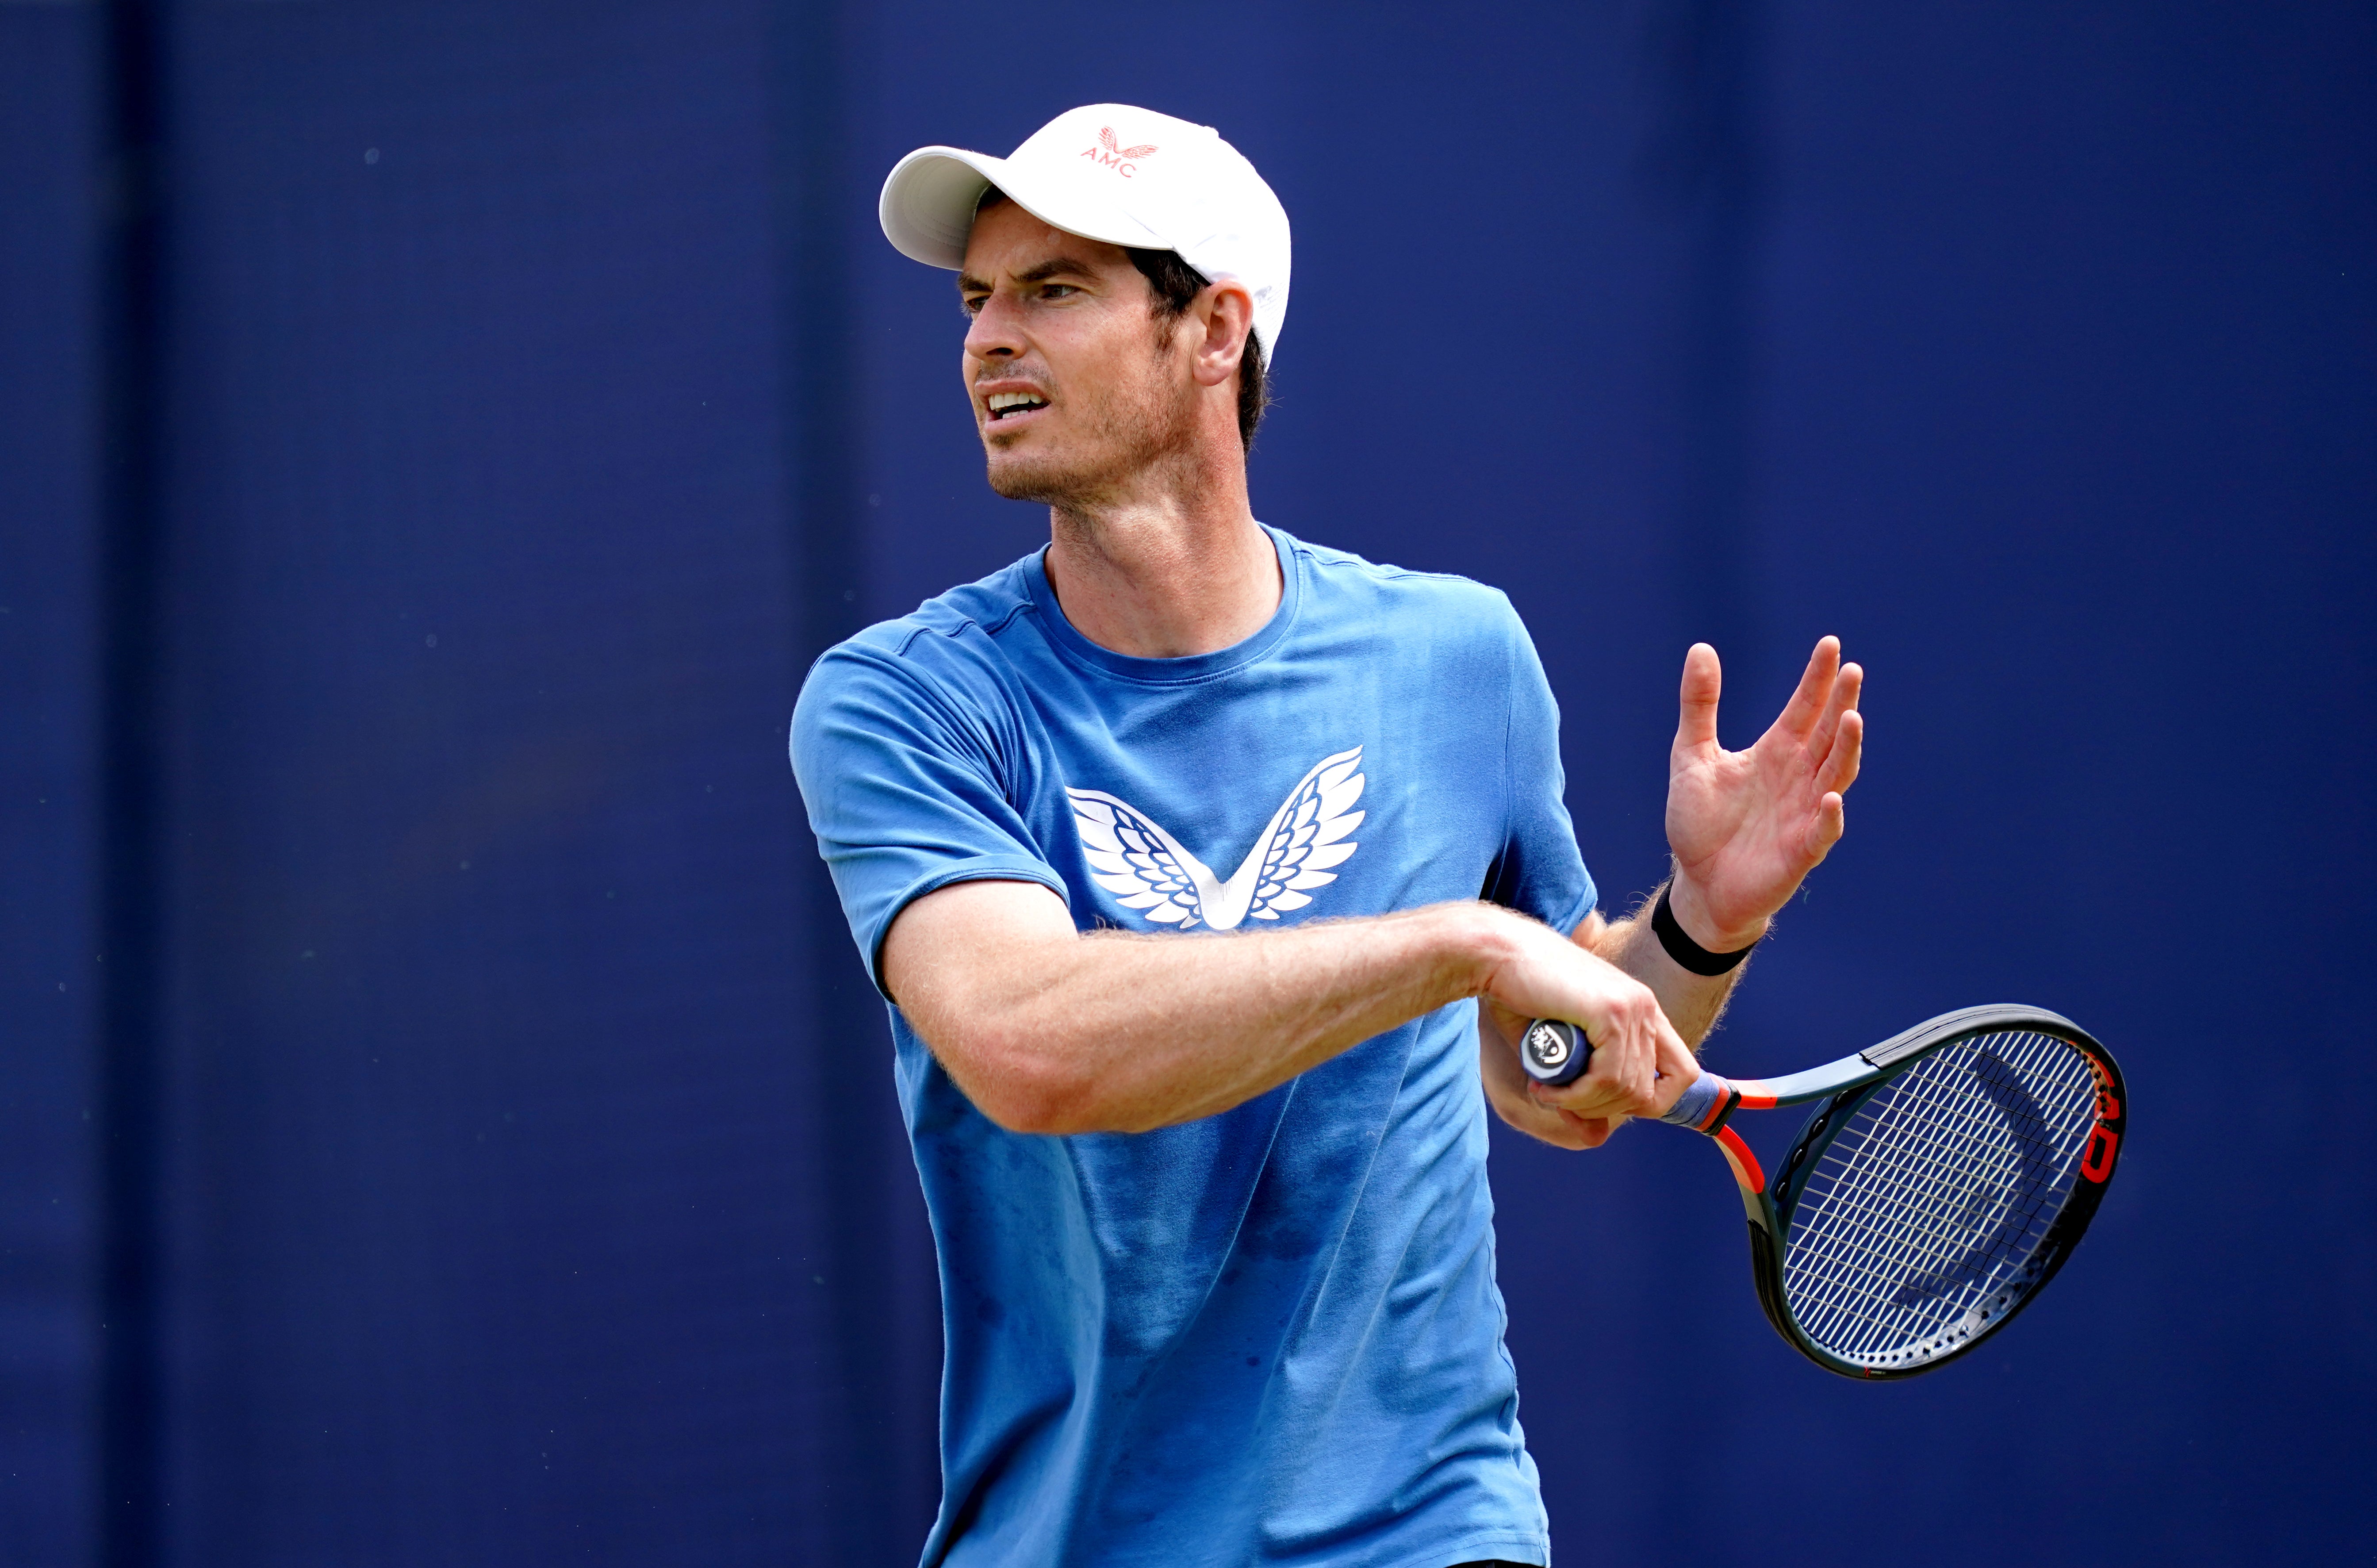 Murray survived a close second set to beat qualifier Viktor Durasovic